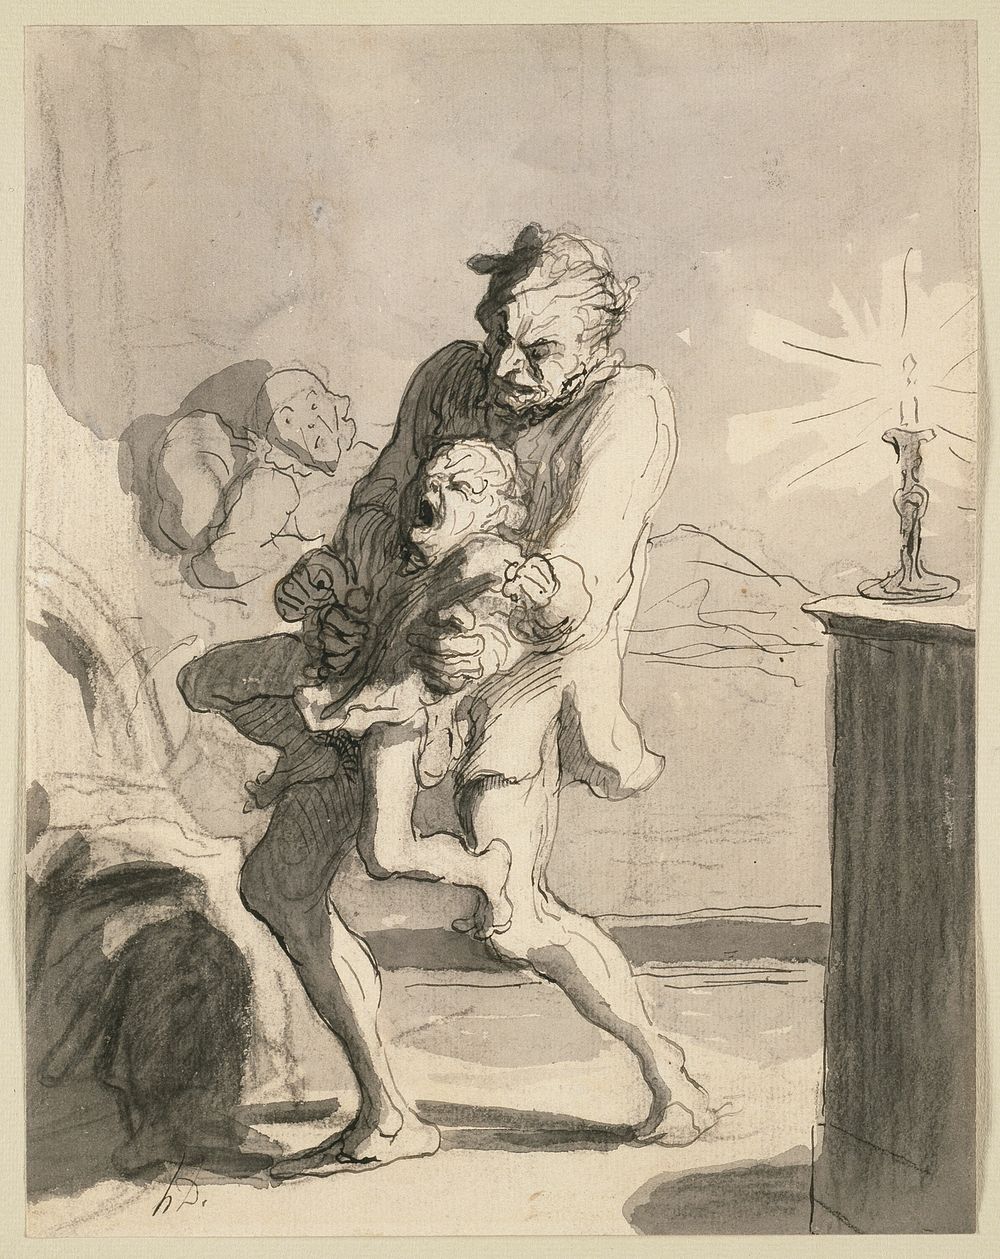 Fatherly Discipline by Honoré-Victorin Daumier